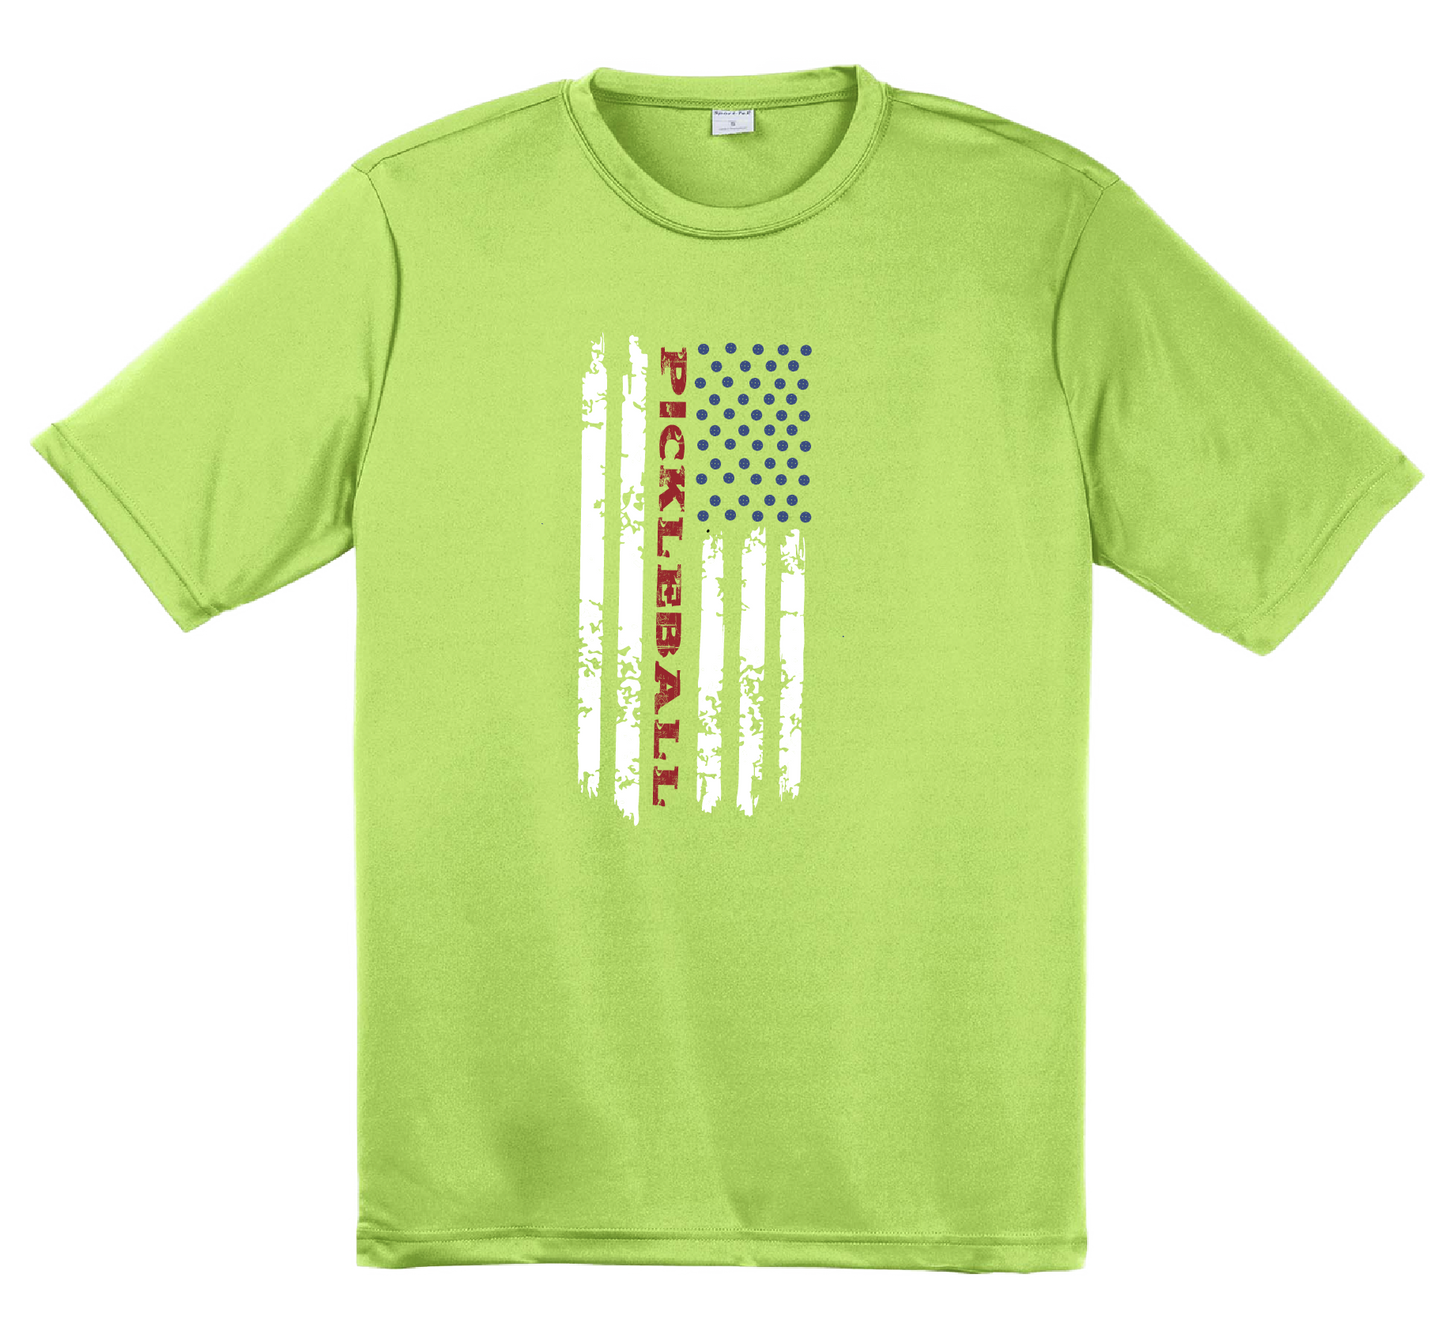 Pickleball Design: Pickleball Vertical Flag on Front or Back Shirt  Men's Styles: Short-Sleeve  Shirts are lightweight, roomy and highly breathable. These moisture-wicking shirts are designed for athletic performance. They feature PosiCharge technology to lock in color and prevent logos from fading. Removable tag and set-in sleeves for comfort.